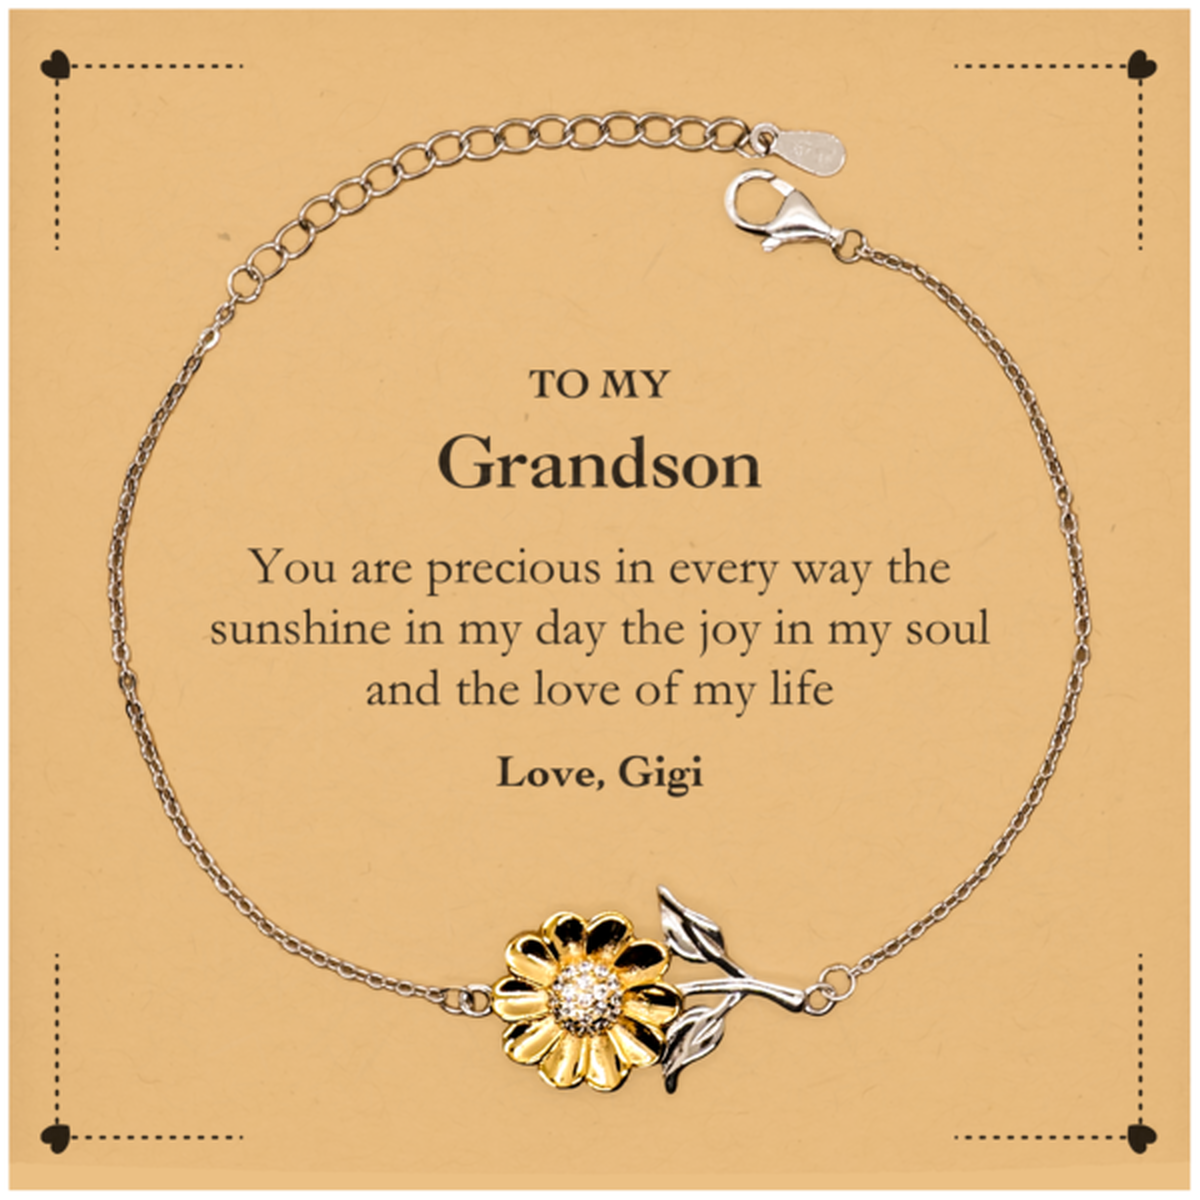 Graduation Gifts for Grandson Sunflower Bracelet Present from Gigi, Christmas Grandson Birthday Gifts Grandson You are precious in every way the sunshine in my day. Love, Gigi